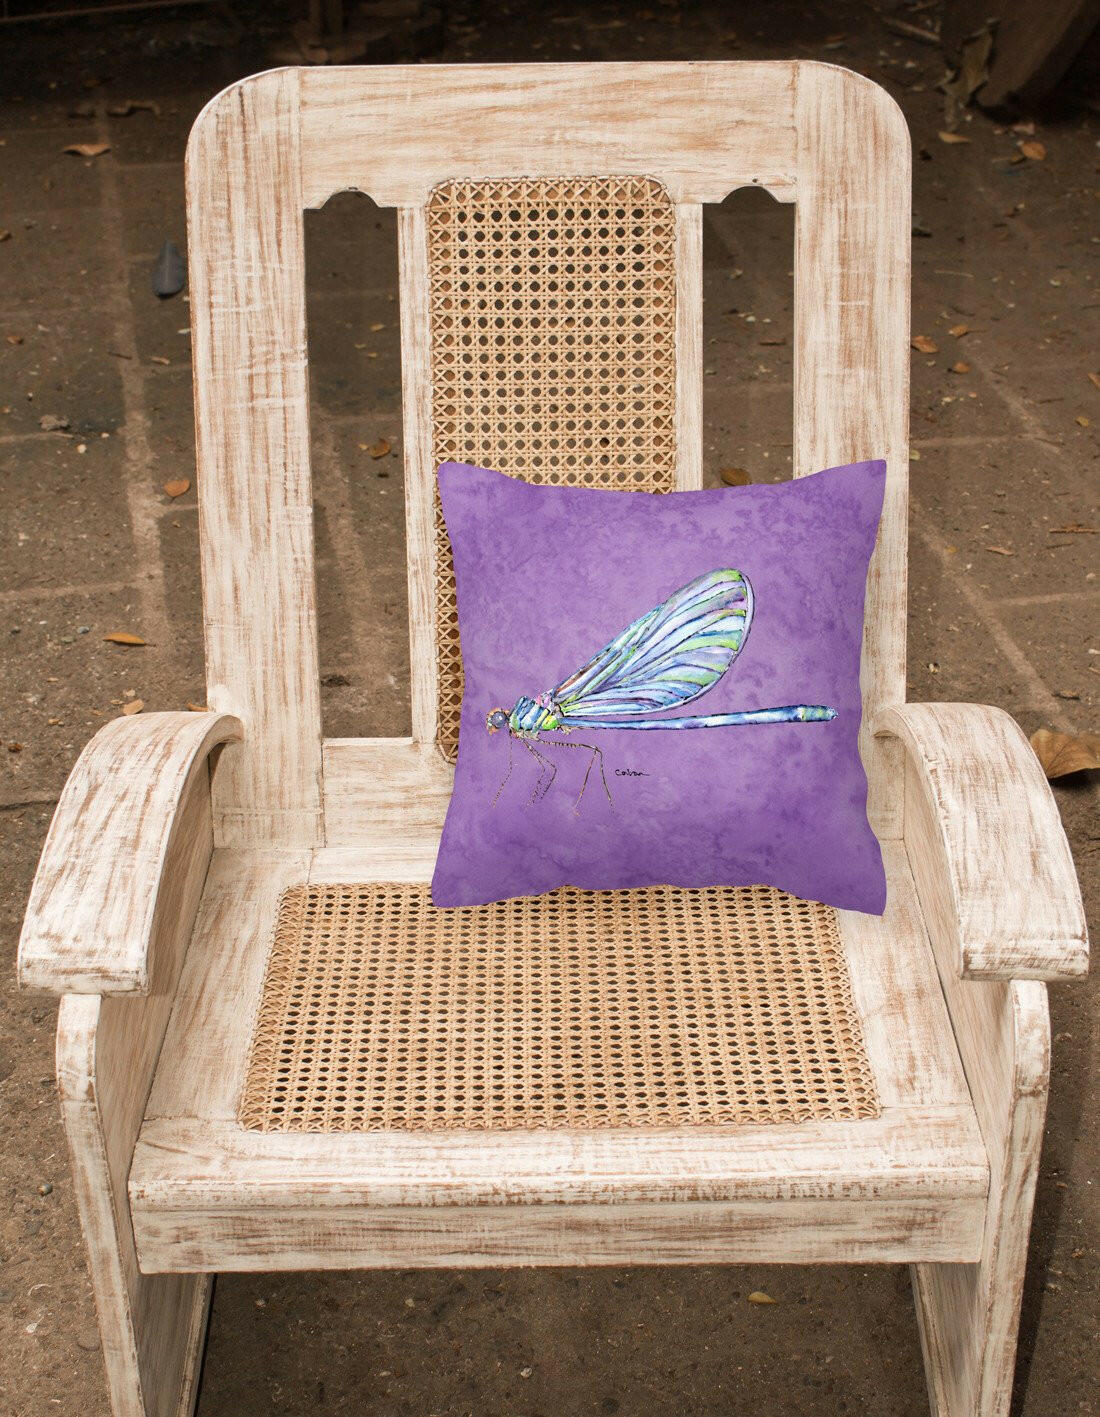 Dragonfly on Purple   Canvas Fabric Decorative Pillow - the-store.com